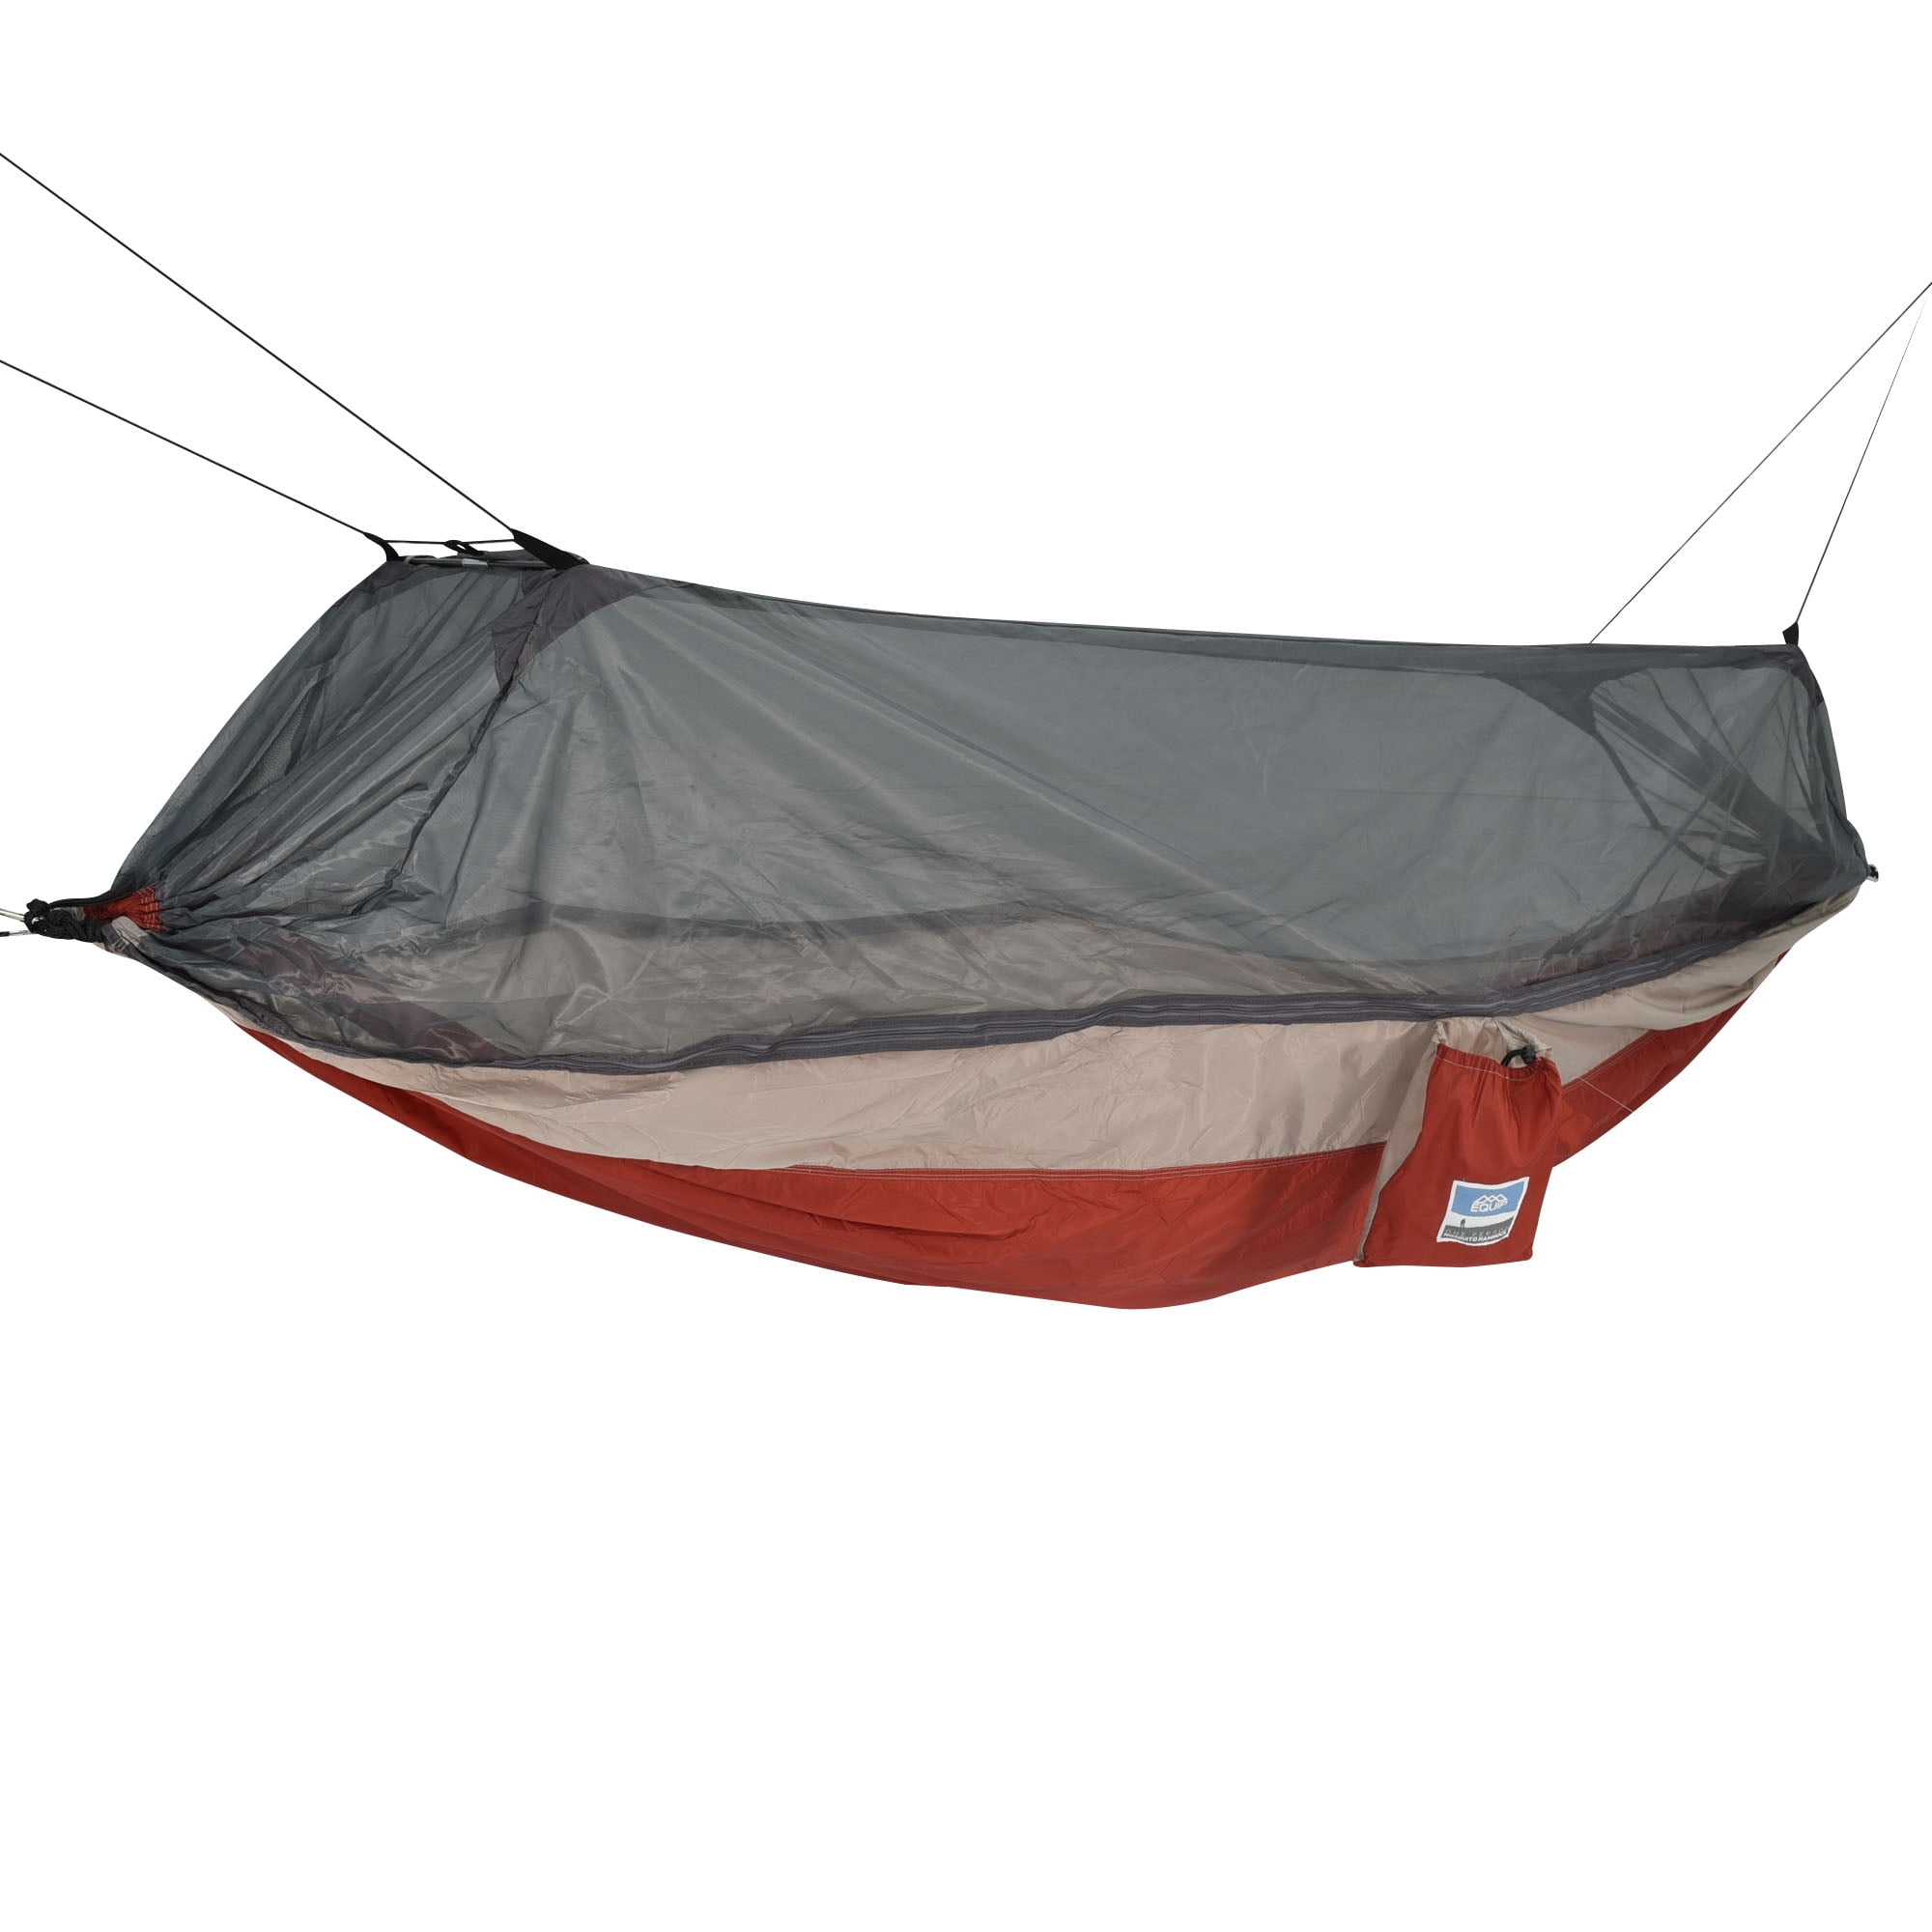 Equip Nylon Mosquito Hammock with Attached Bug Net, 1 Person Red and Taupe,  Open Size 115